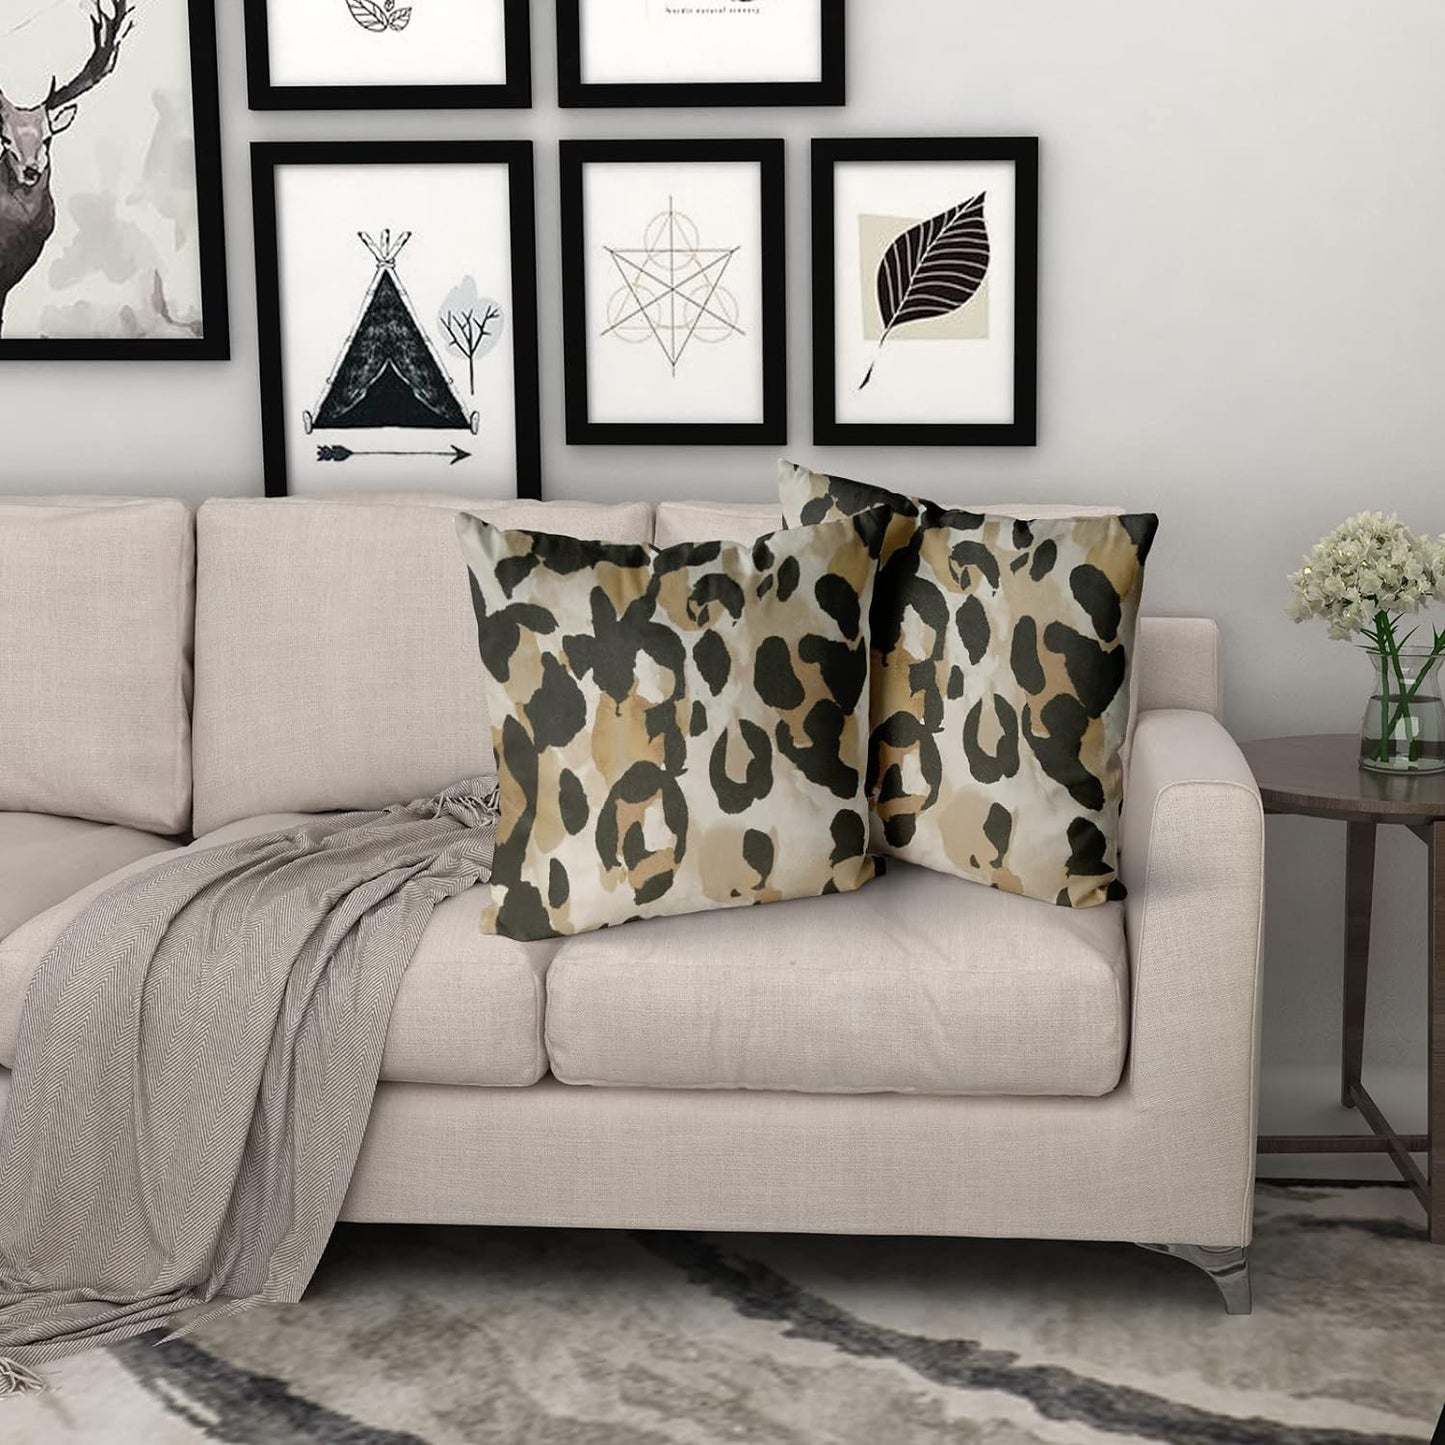 Lvhompro Leopard Pillows Covers Set of 2 Cheetah Decorative Animal Brown Grey Farmhouse Fashion Home Sofa Soft Cushion Cover Throw Pillowcase Gift for Couch Indoor Bed 18 x 18 Inch